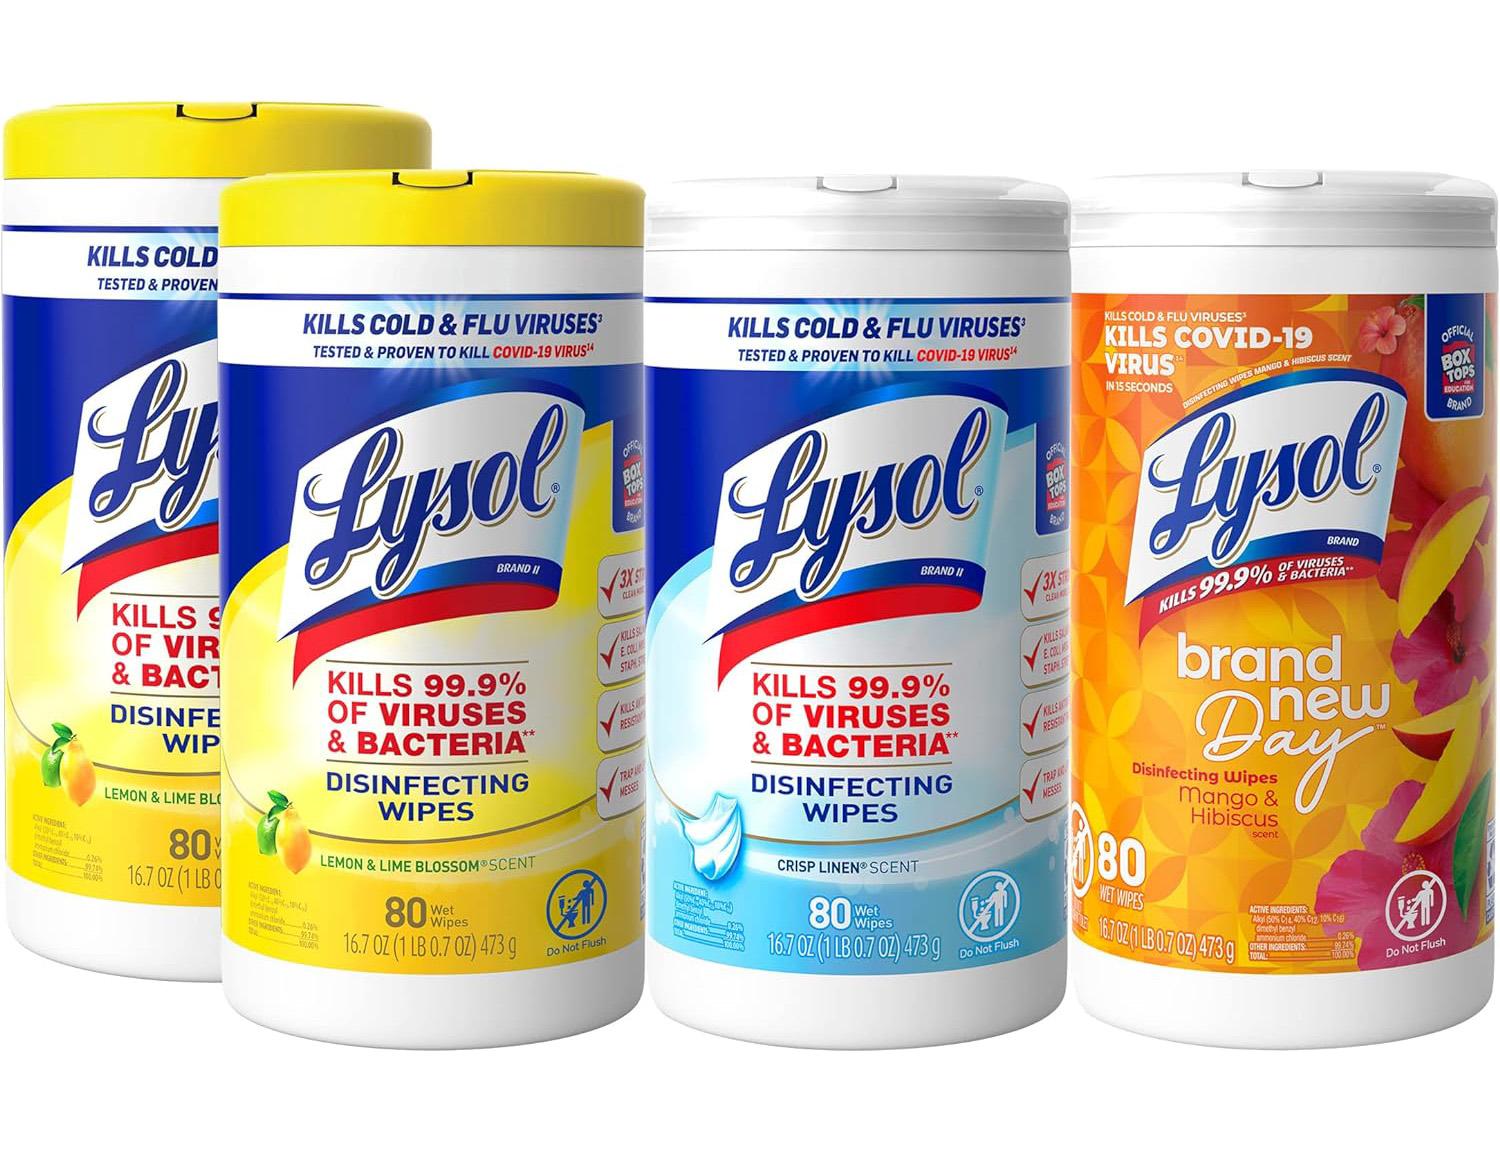 Lysol Disinfectant Wipes Bundle 4 Pack with $8 Amazon Credit for $14.22